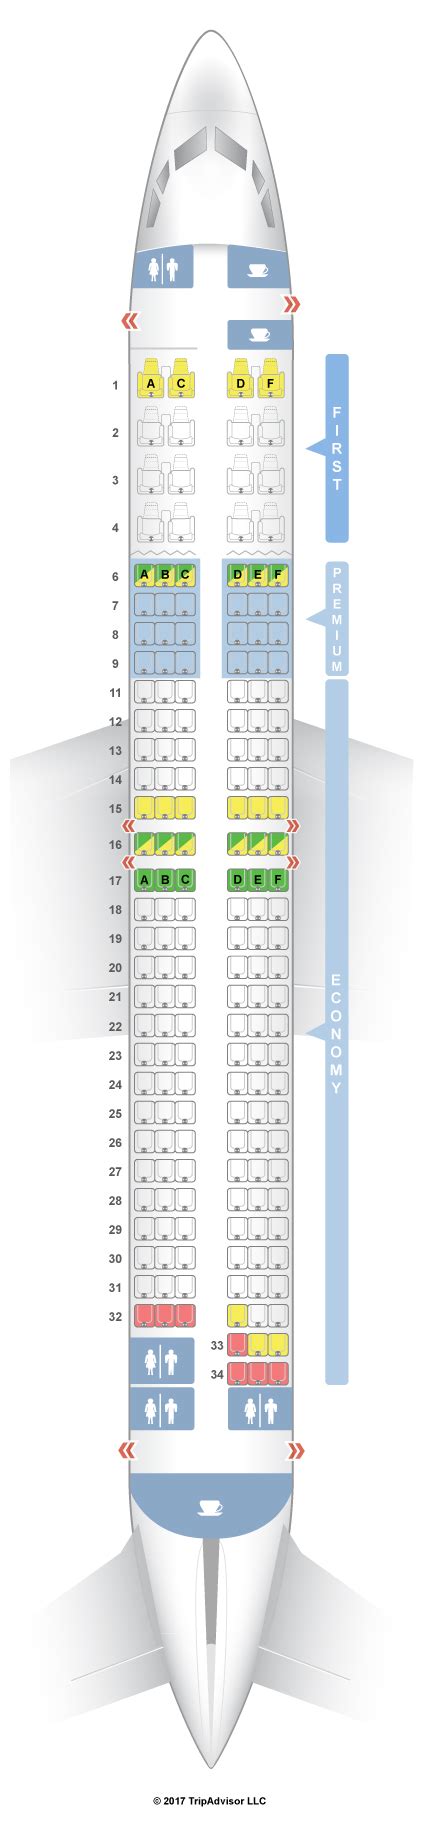 Our picks: rows 6 (curtain in front) and 